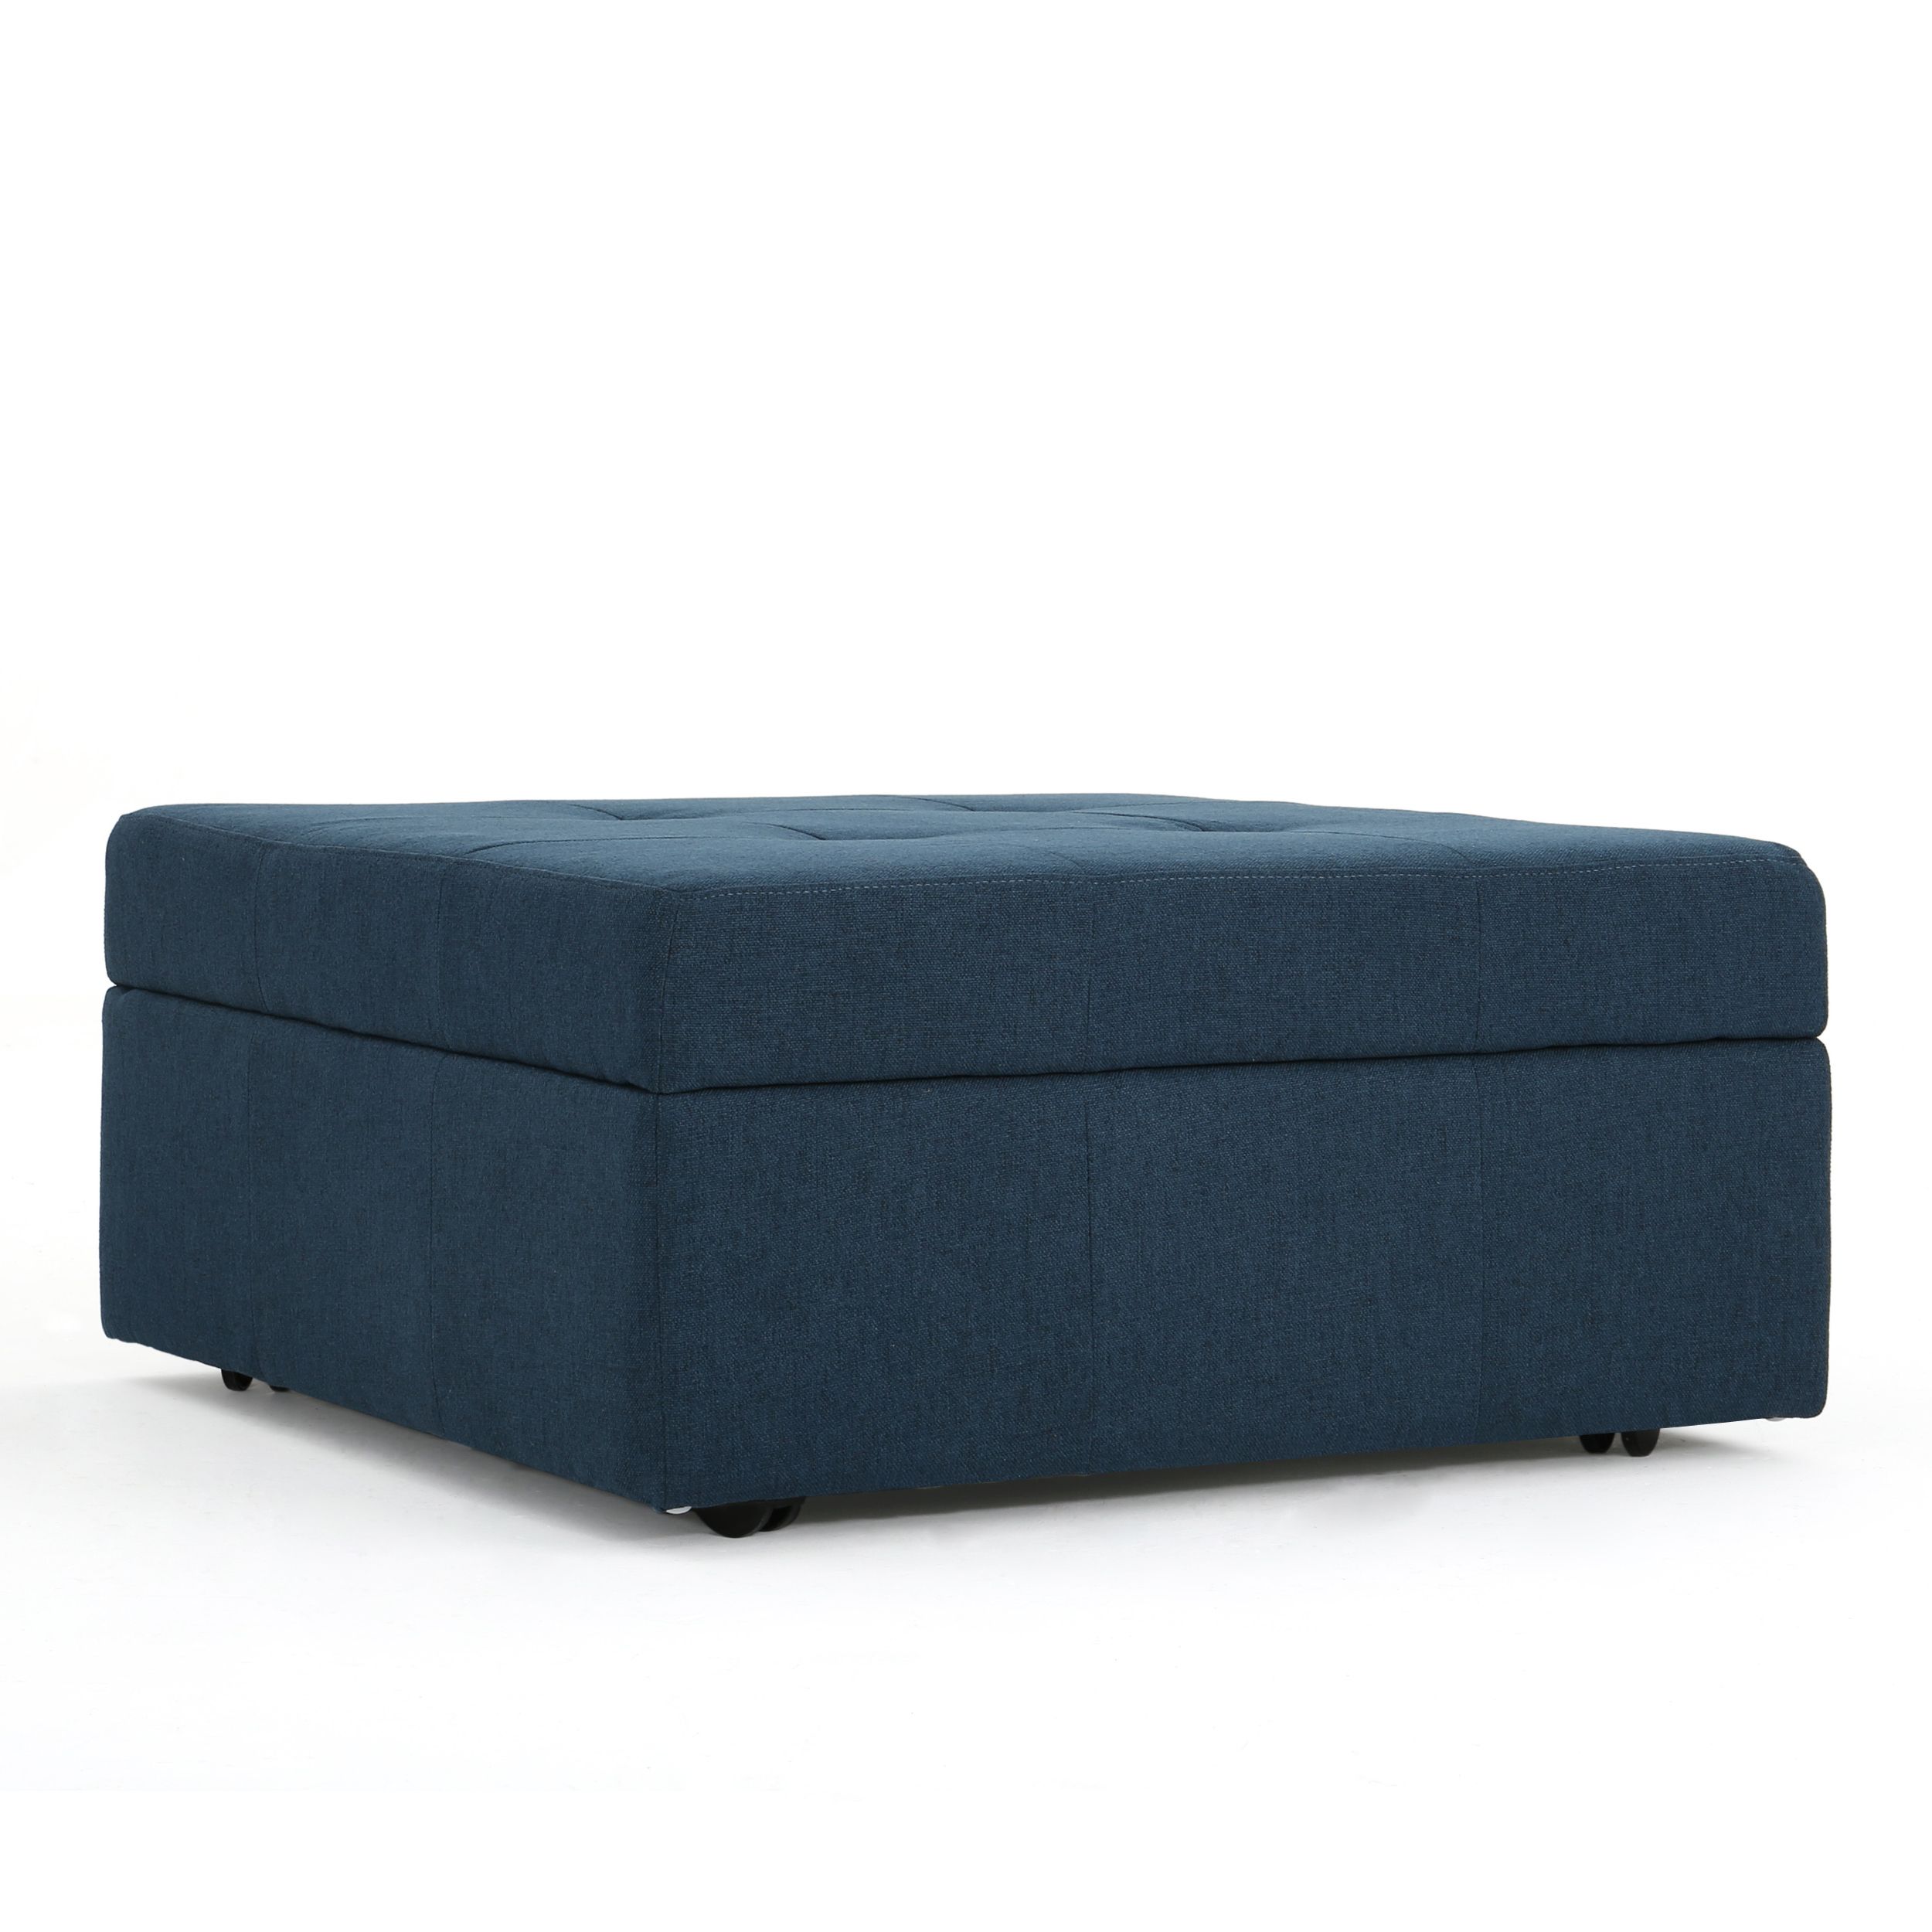 Trendy Channing Contemporary Tufted Fabric Storage Ottoman With Rolling In Blue Fabric Tufted Surfboard Ottomans (View 3 of 10)